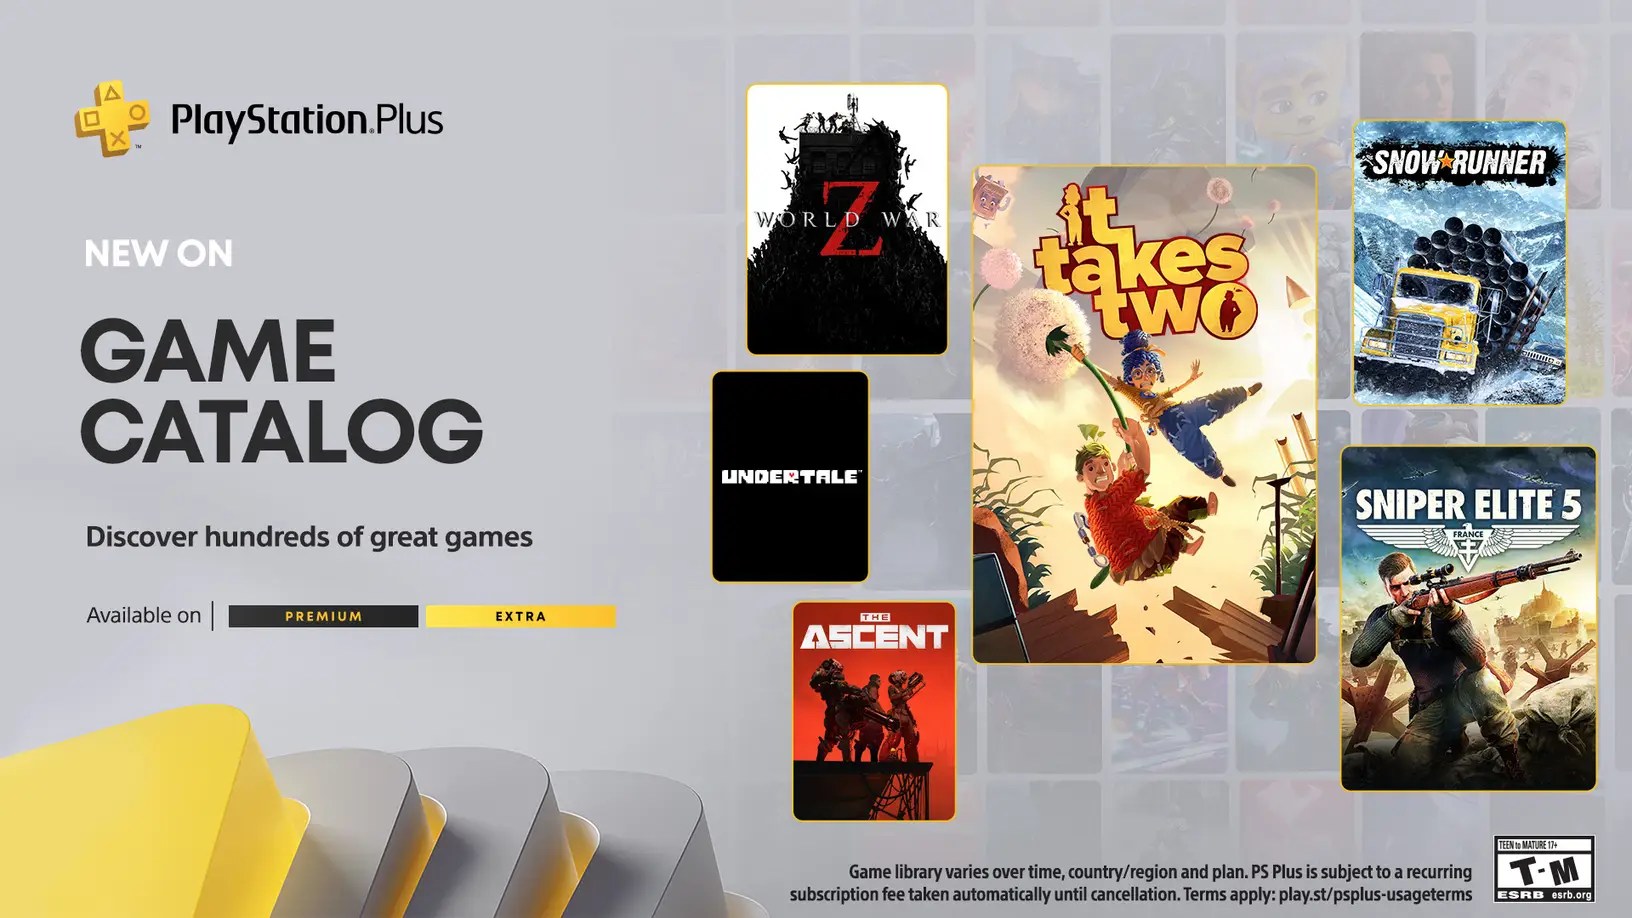 PlayStation Plus on PC review: Not exactly a premium service